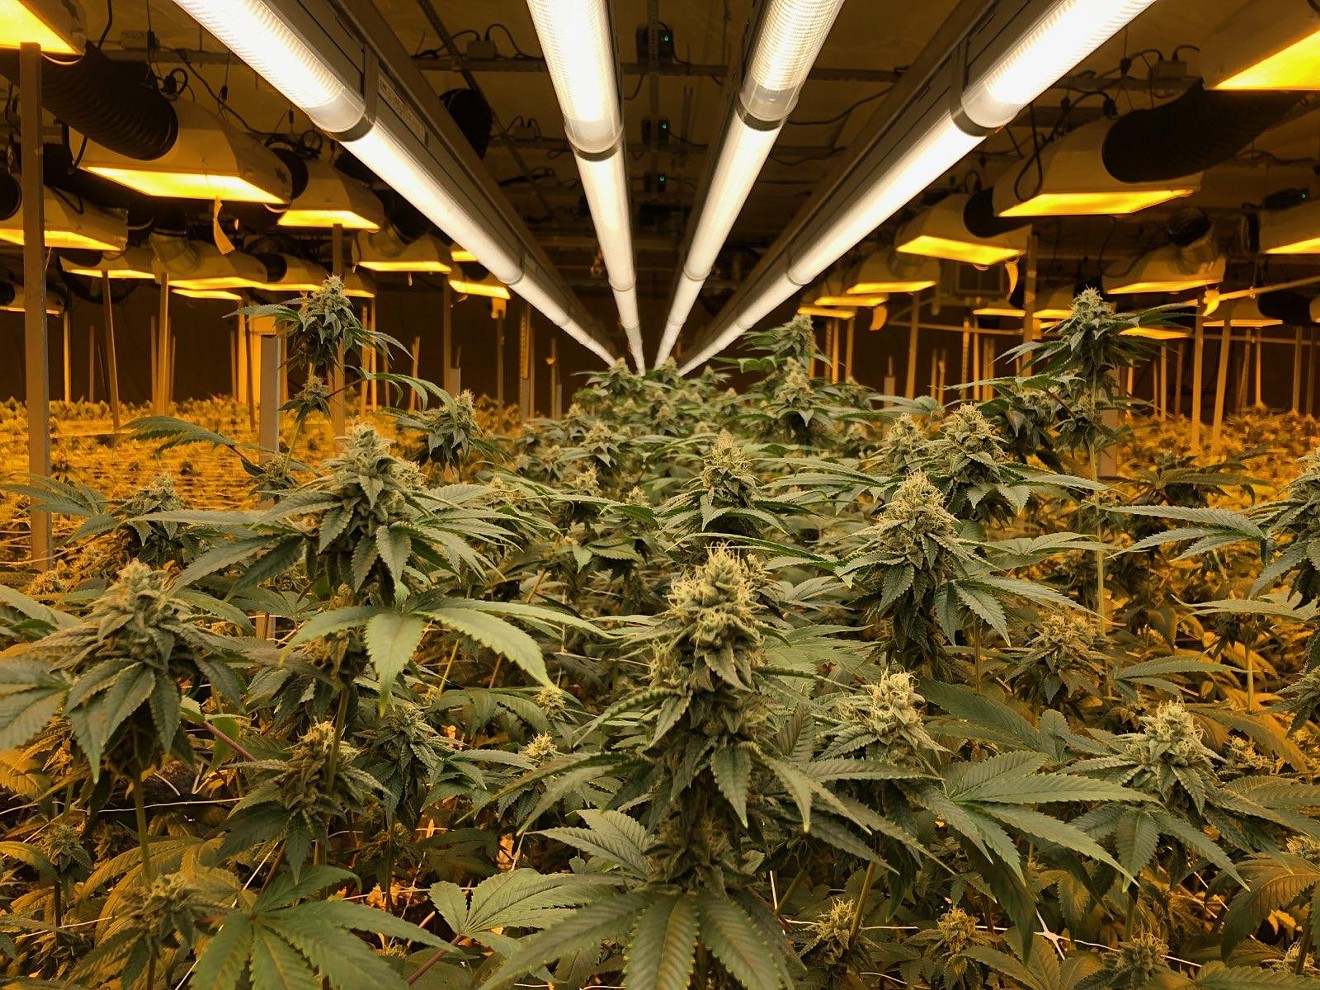 Every kilogram of grown cannabis costs an estimated average of $2,500 in energy consumption.